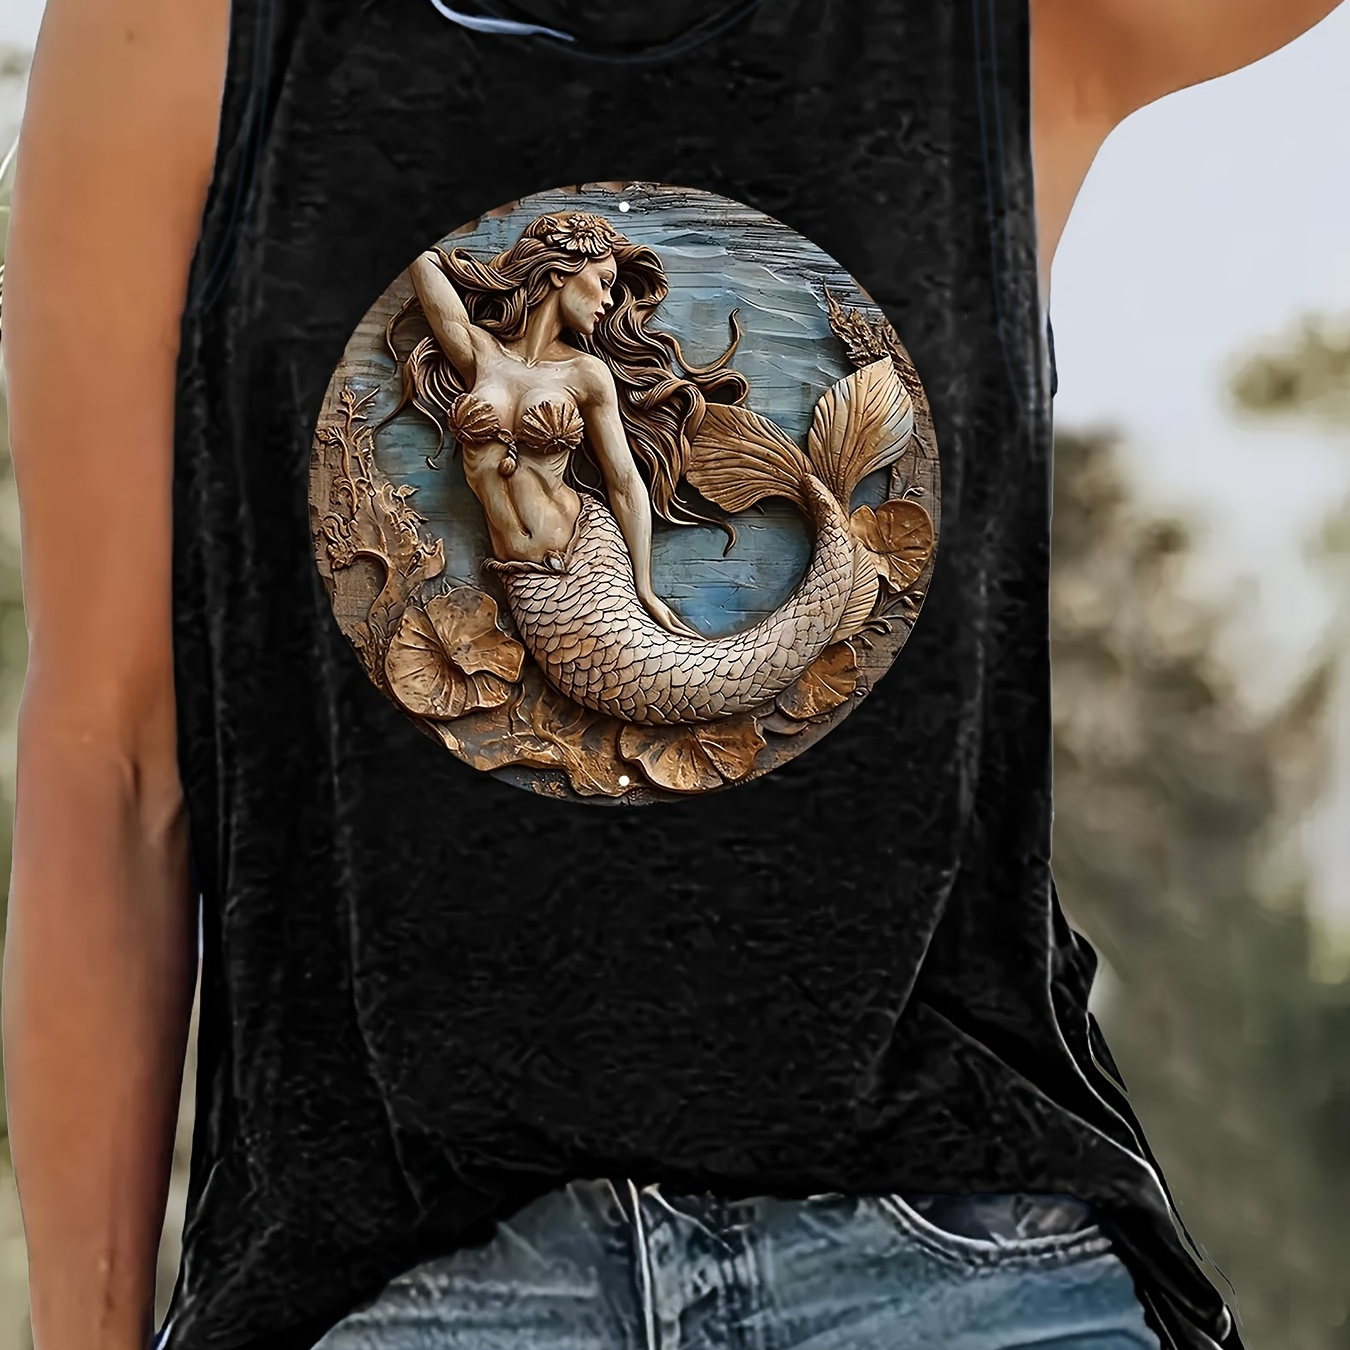 

Mermaid Three-dimensional Print Tank Top, Sleeveless Crew Neck Casual Top For Summer & Spring, Women's Clothing